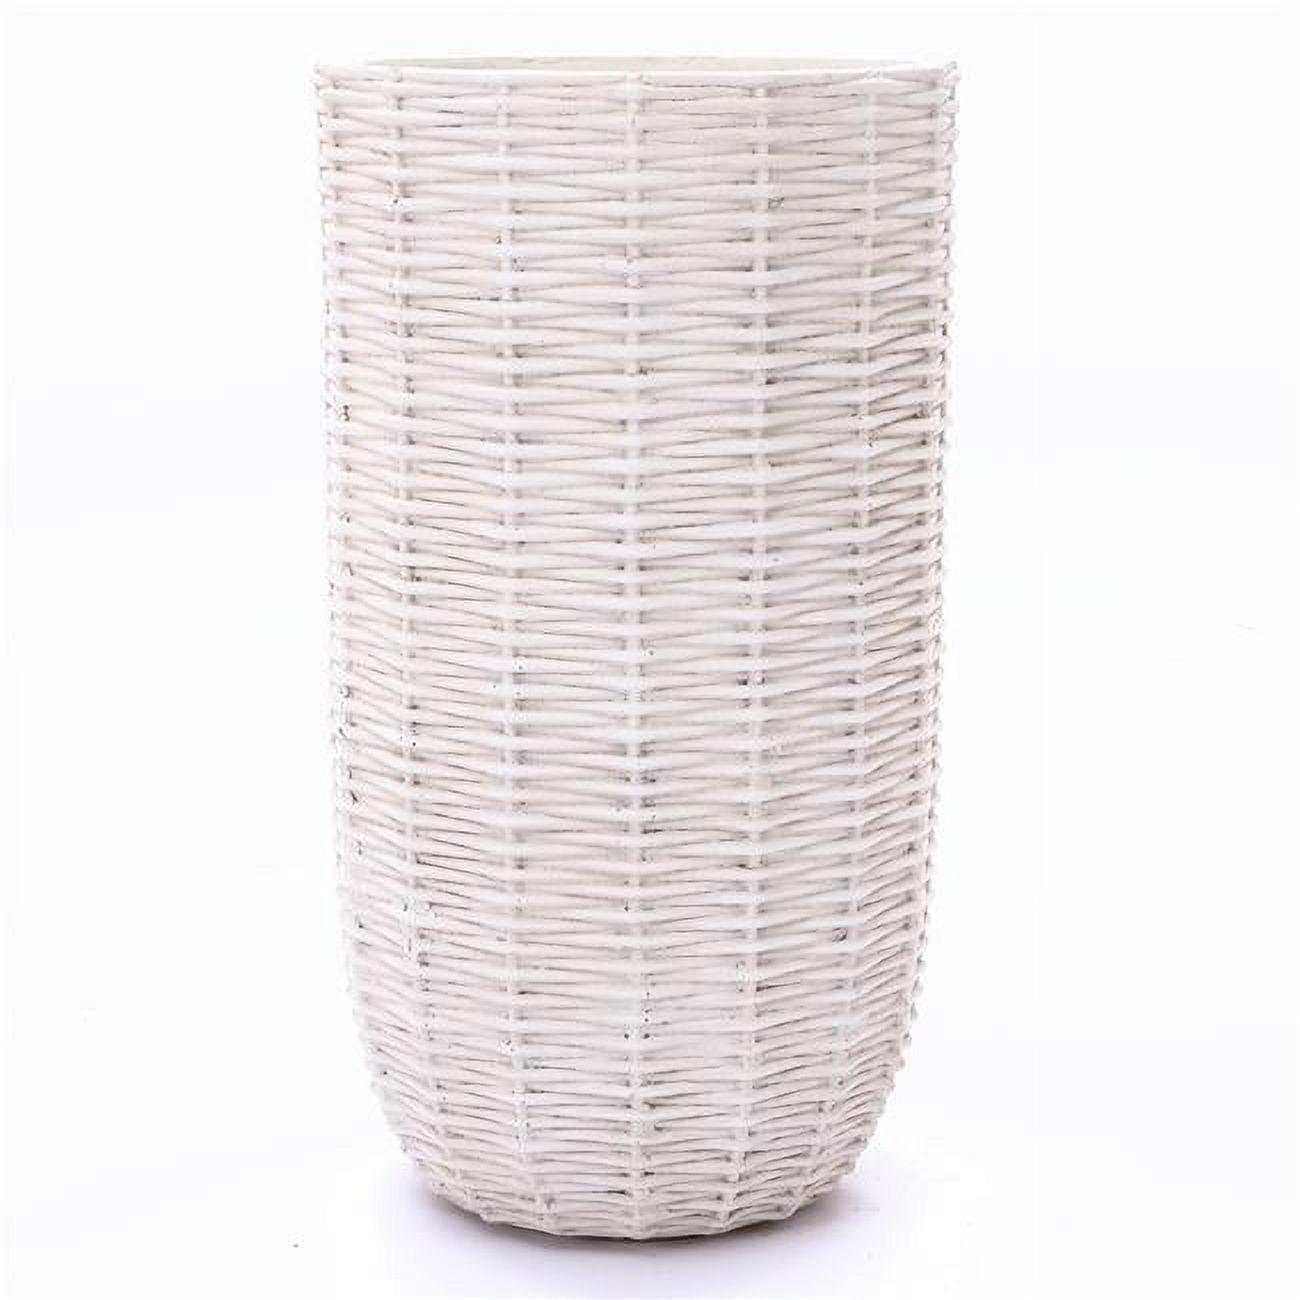 Rustic Off-White MgO Wicker Tall Round Planter, 21.6"